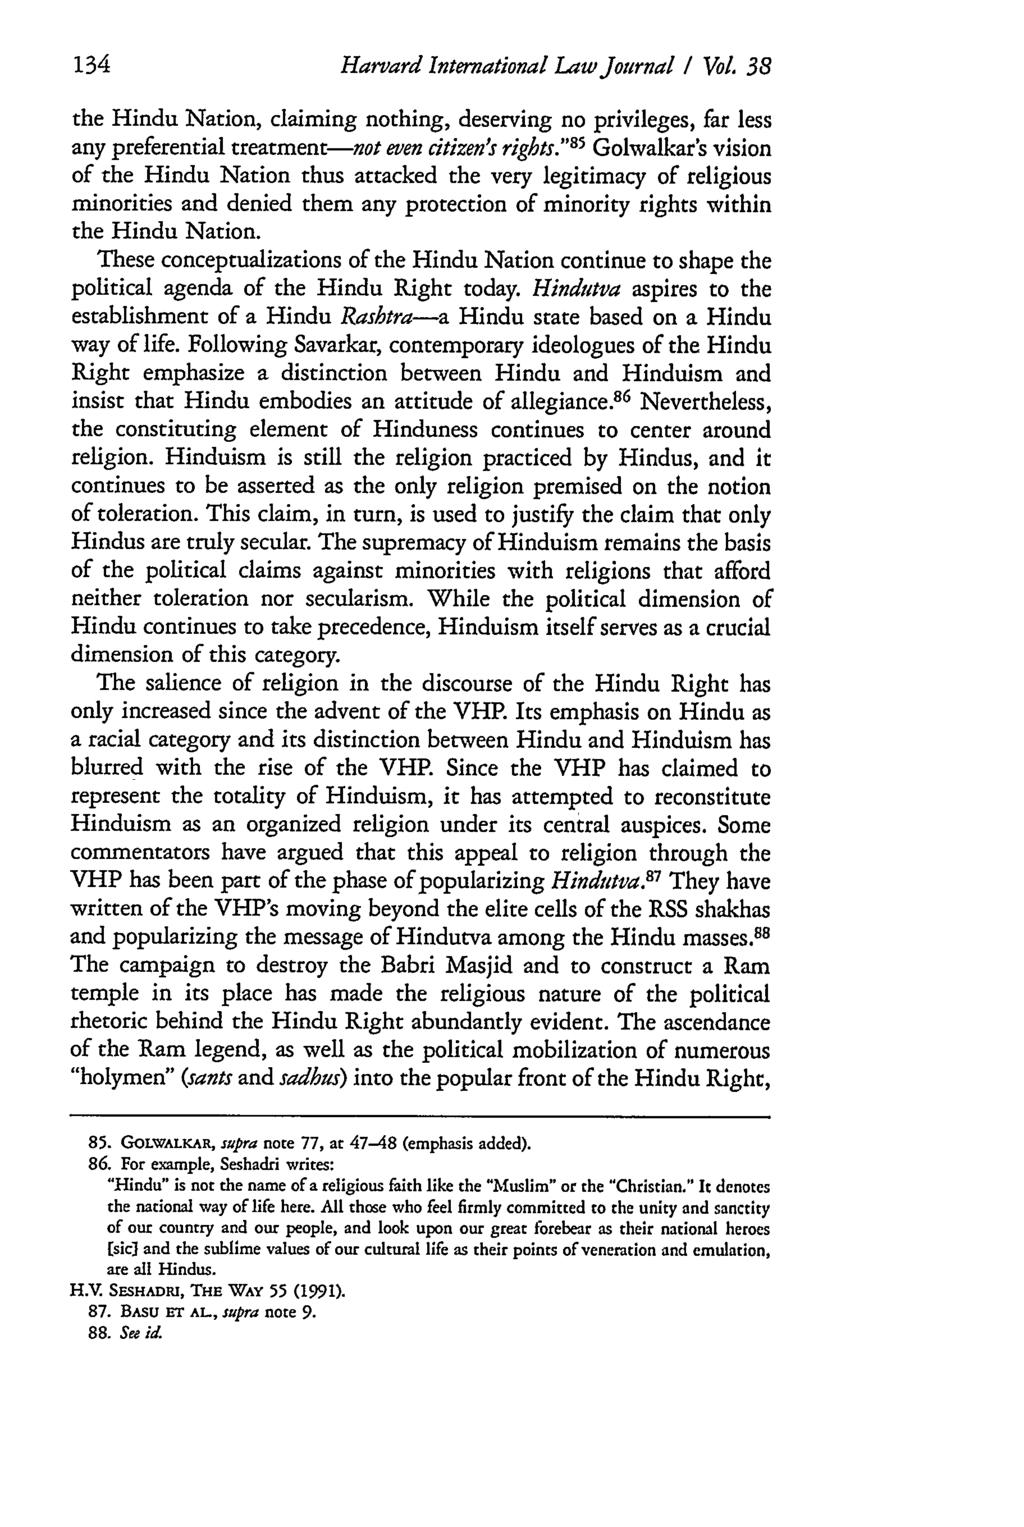 Harvard International Law Journal / Vol. 38 the Hindu Nation, claiming nothing, deserving no privileges, far less any preferential treatment-not even citizen's rights.